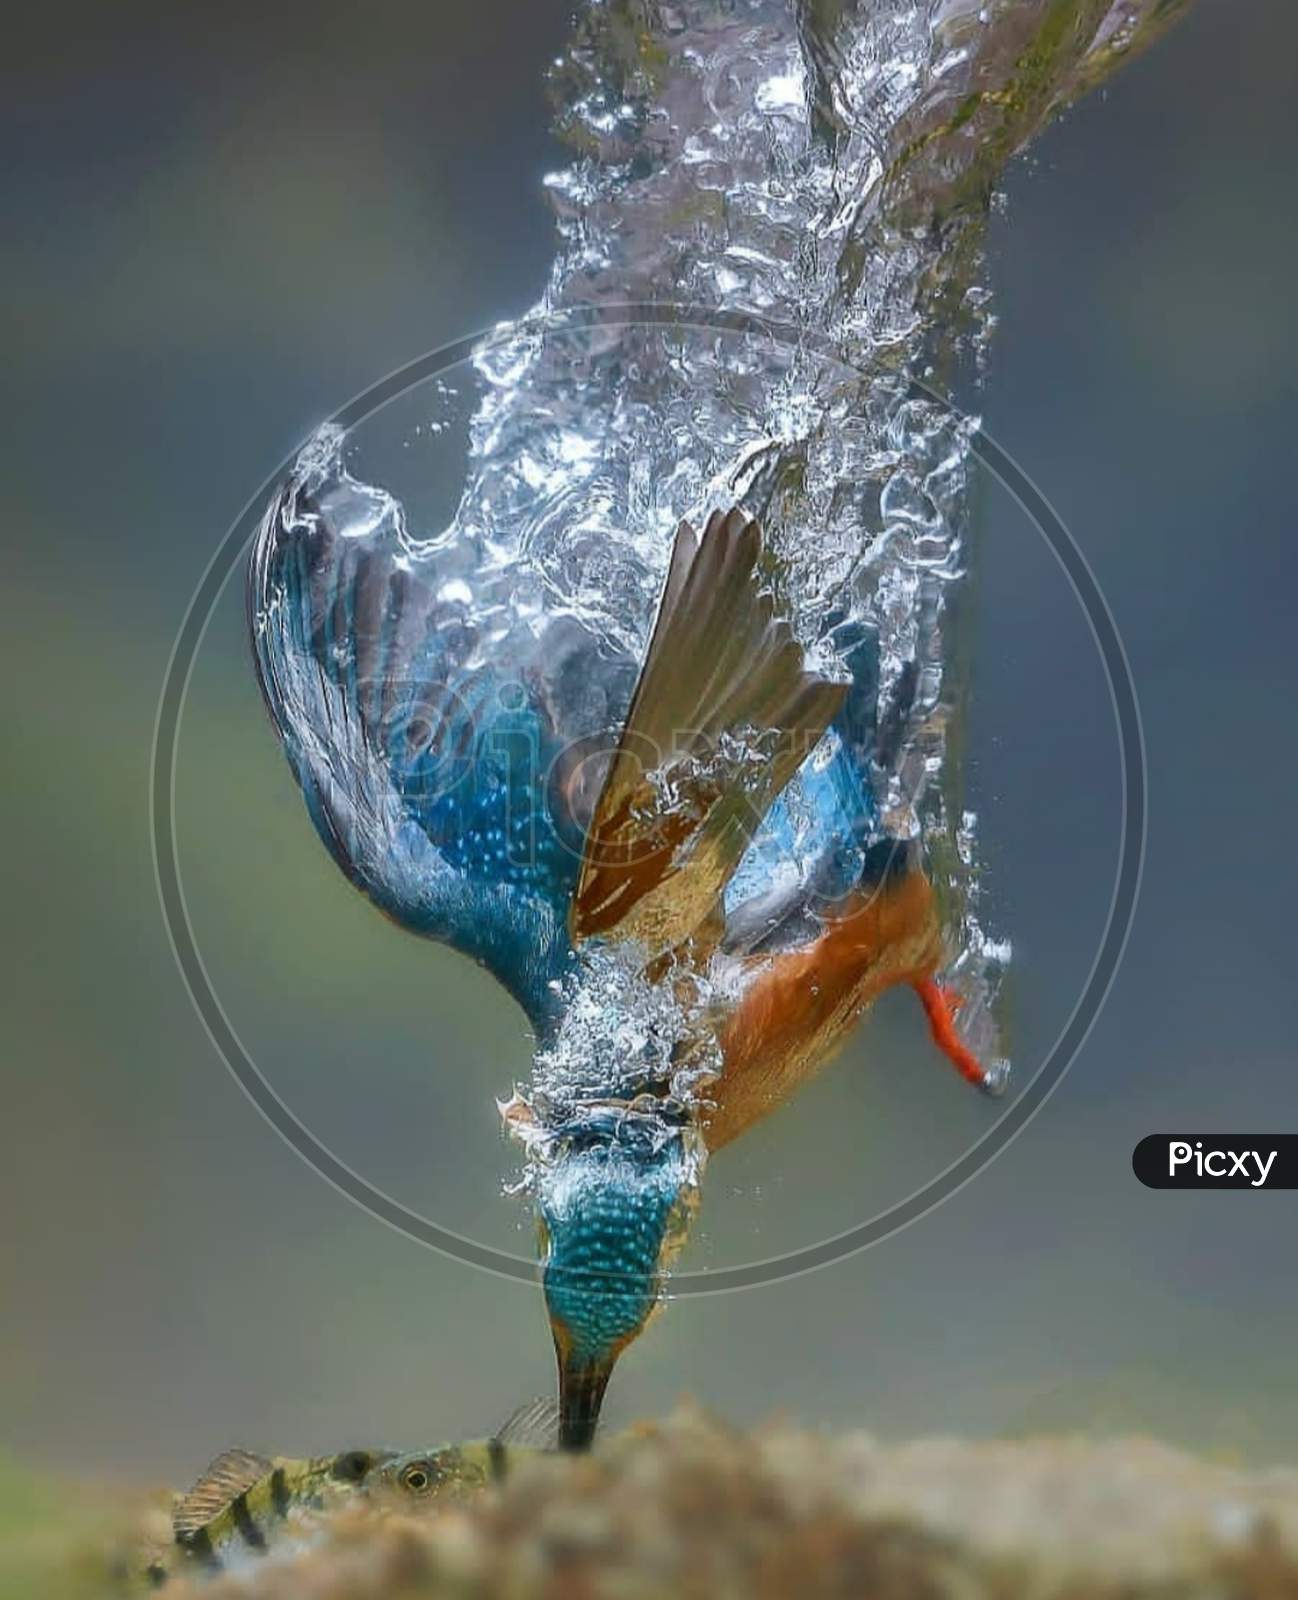 Bird catching a fish in water